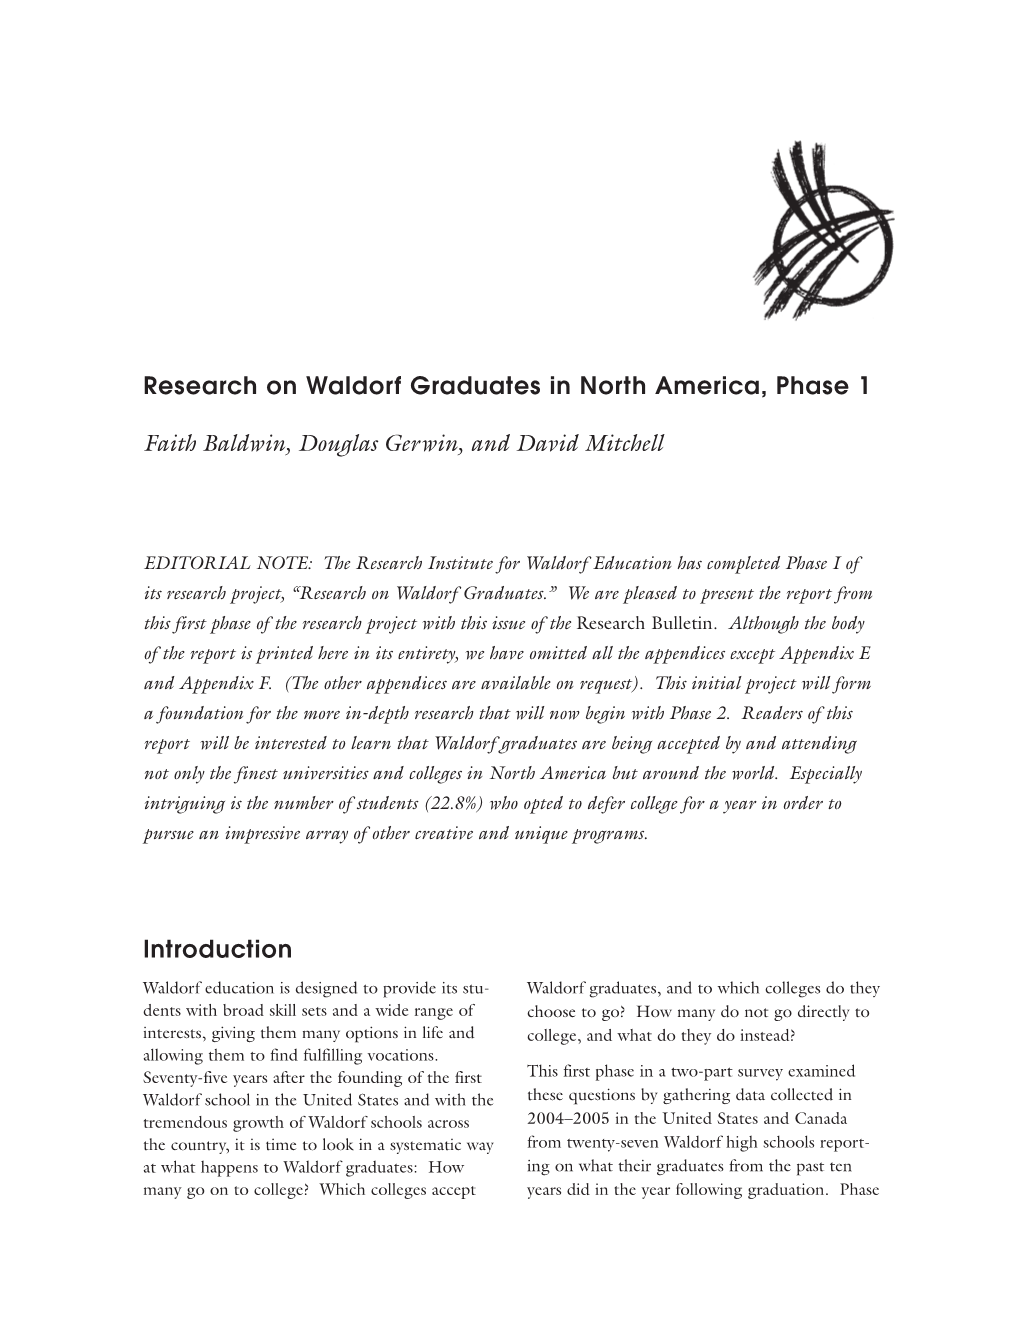 Research on Waldorf Graduates in North America, Phase 1